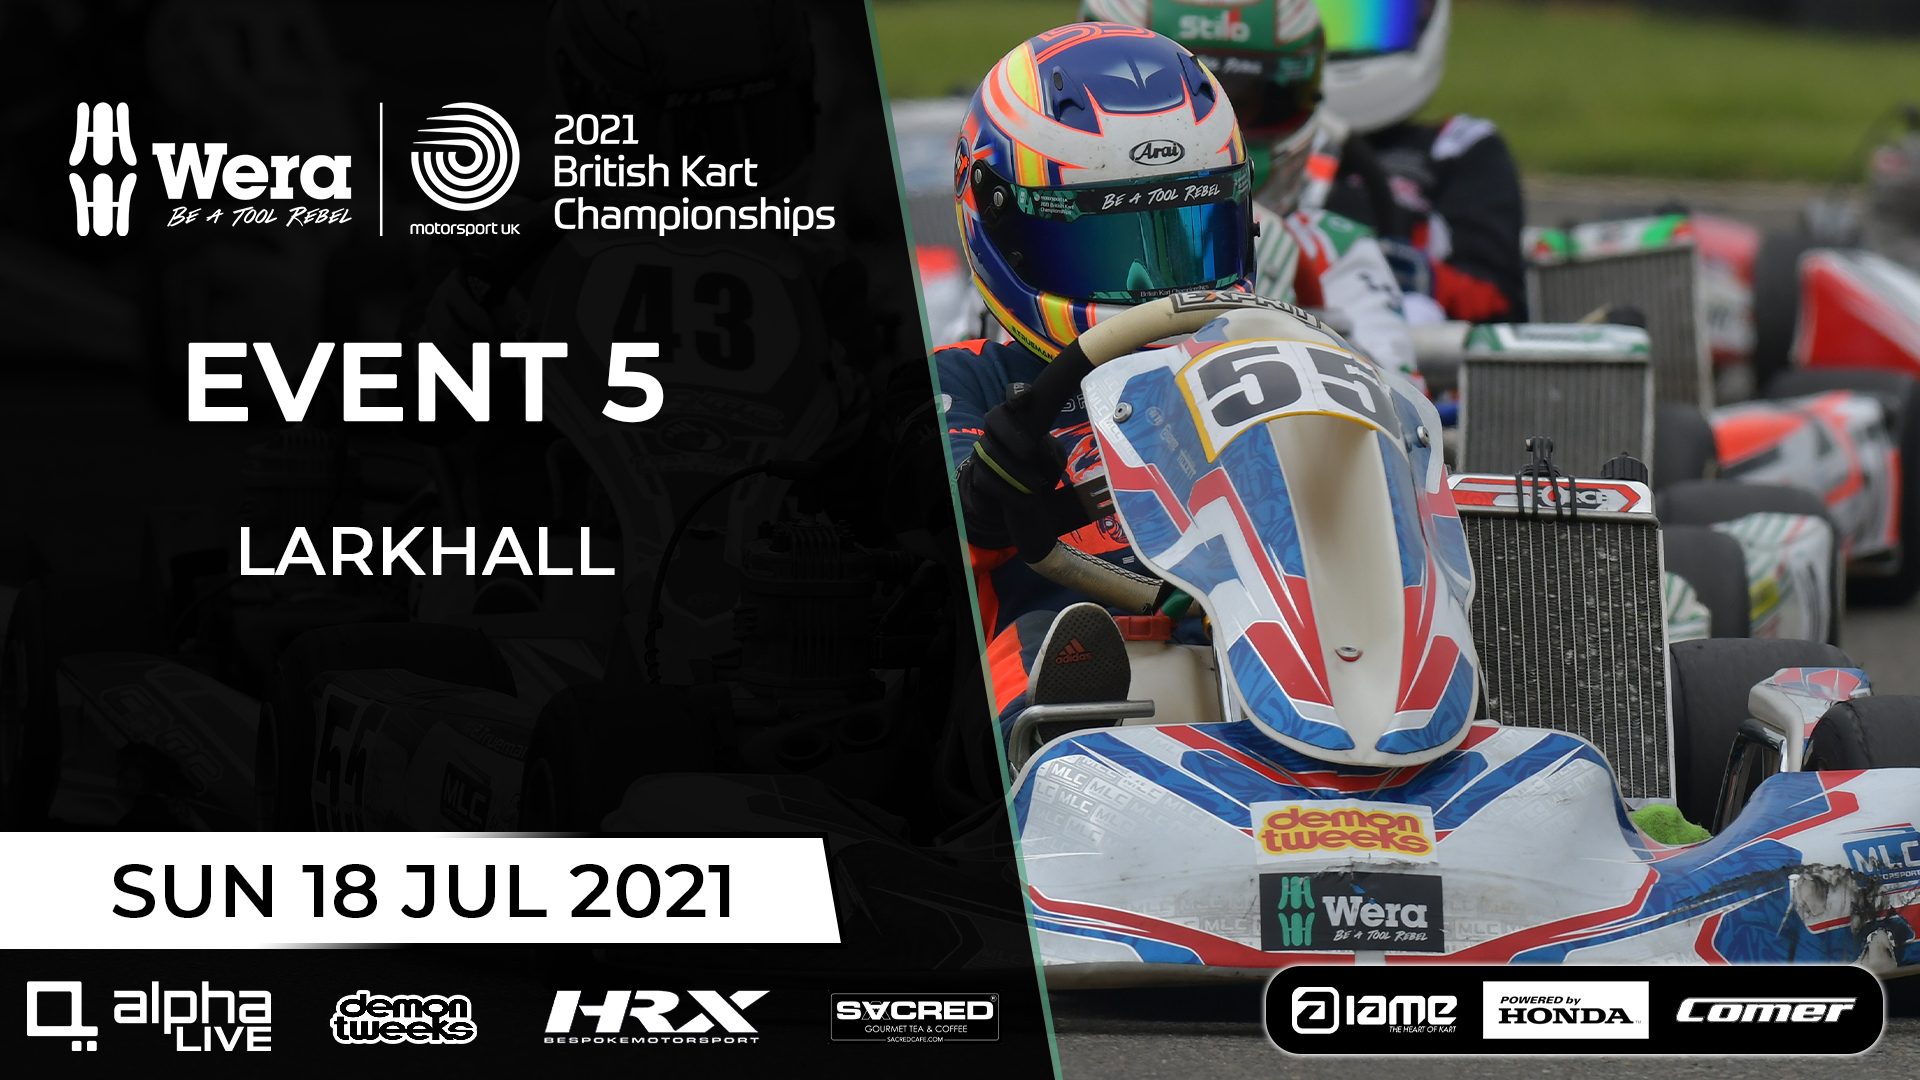 WATCH AGAIN: Event #5 from Larkhall (Sunday)